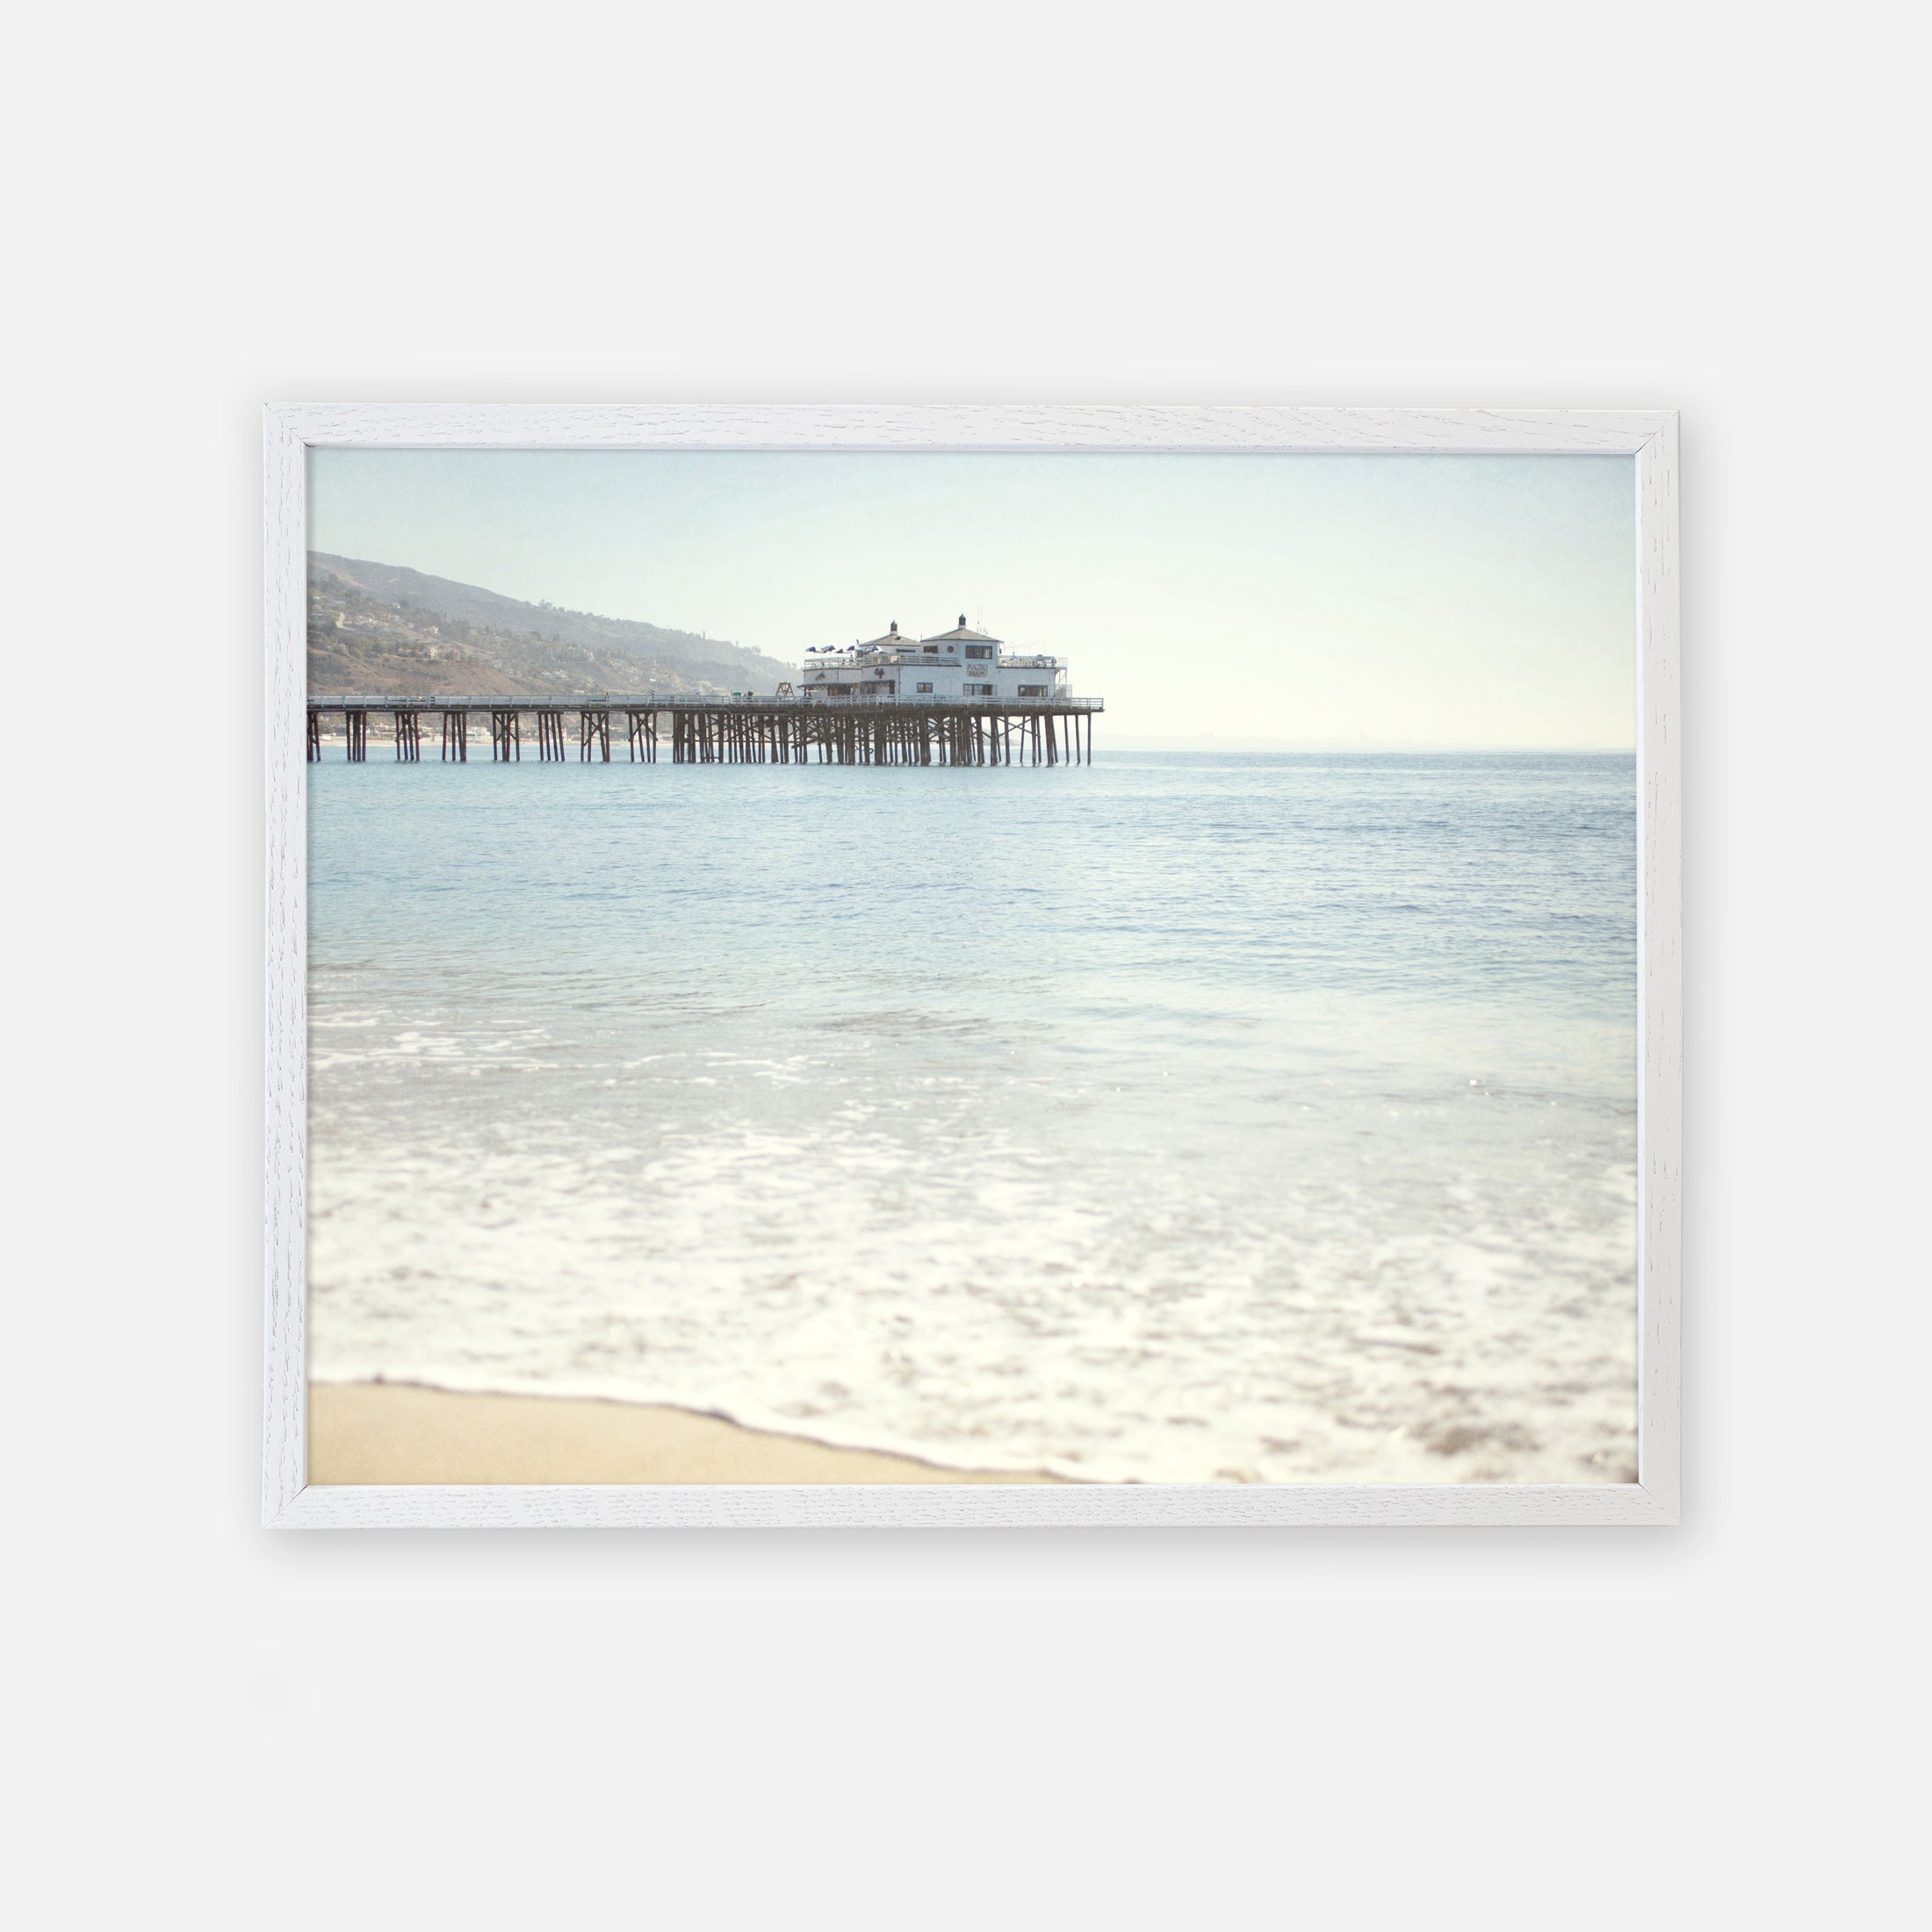 A serene beach scene with gentle waves lapping at the shore and a California Beach Print by Offley Green featuring Malibu Pier extending into the ocean, supporting a large building under a clear sky.